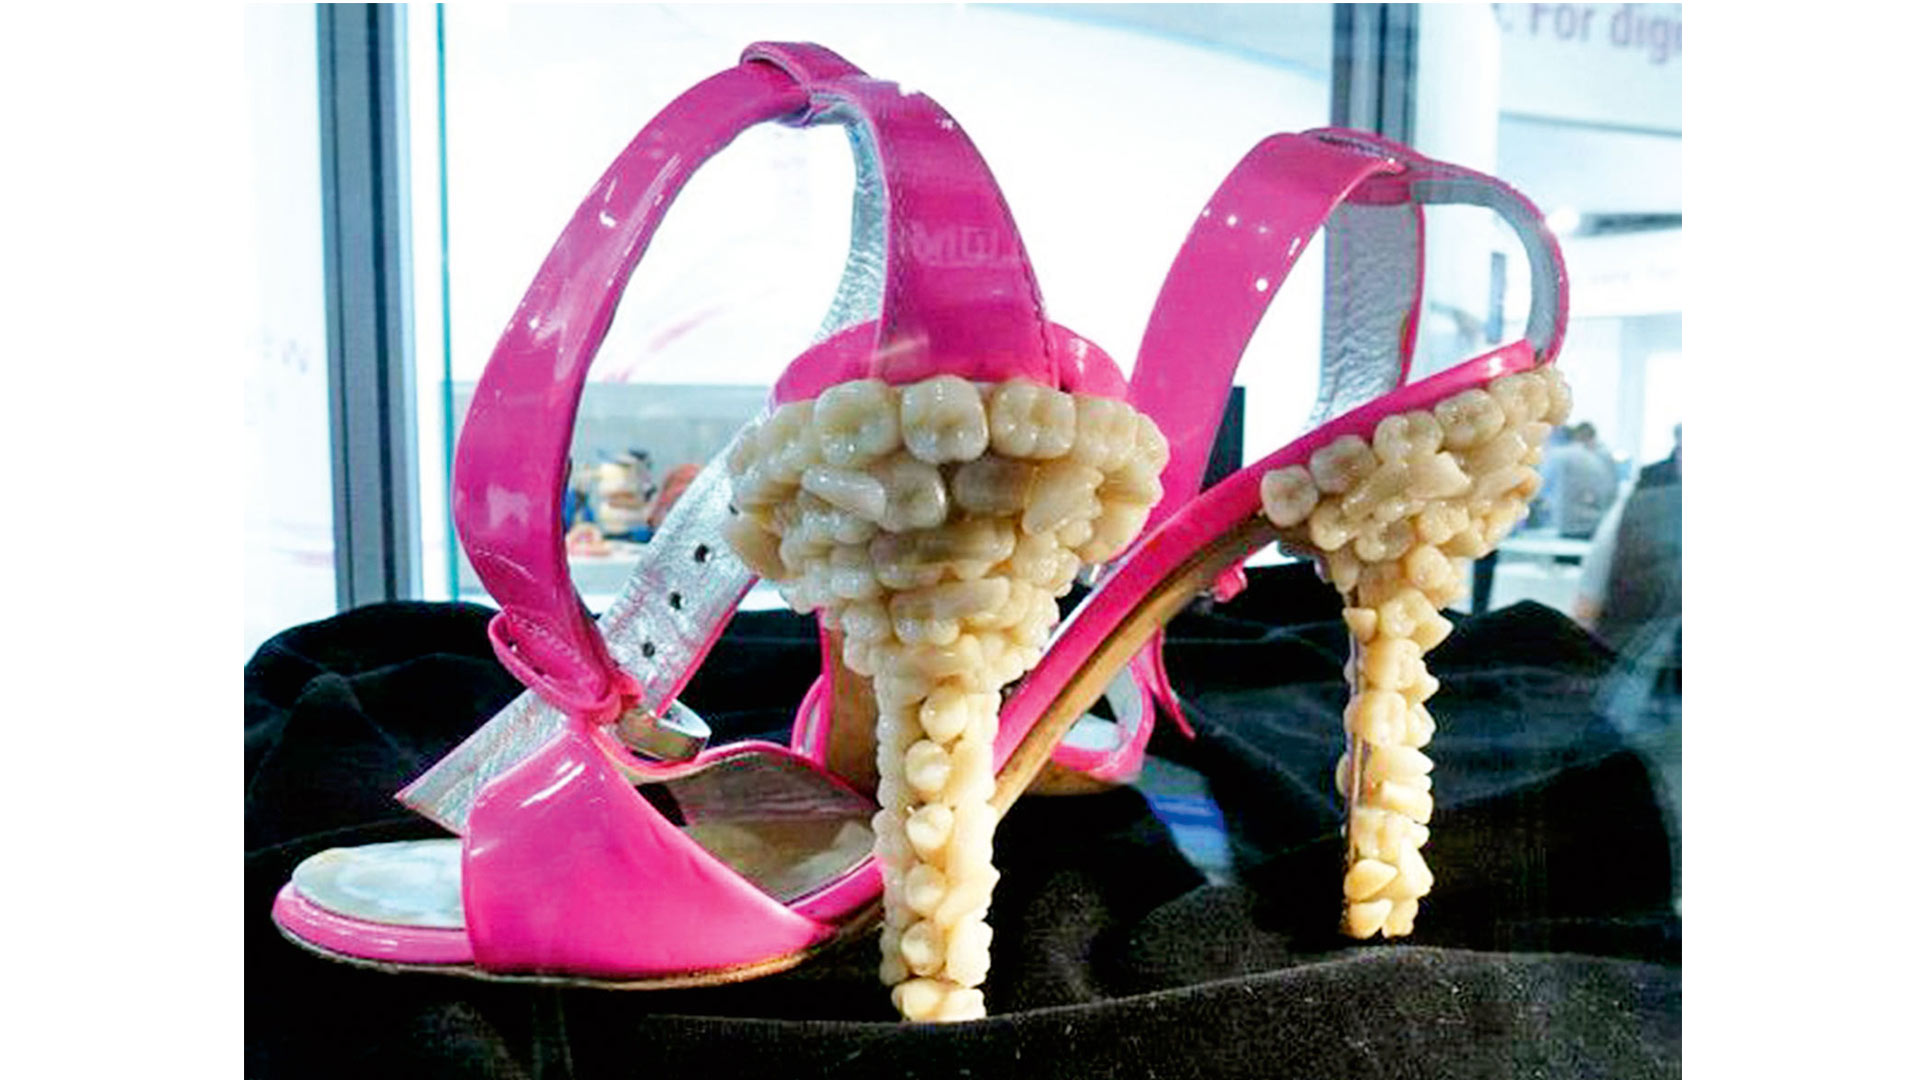 You Probably Don’t Want To Wear These Ugliest Shoes To Walk The Earth